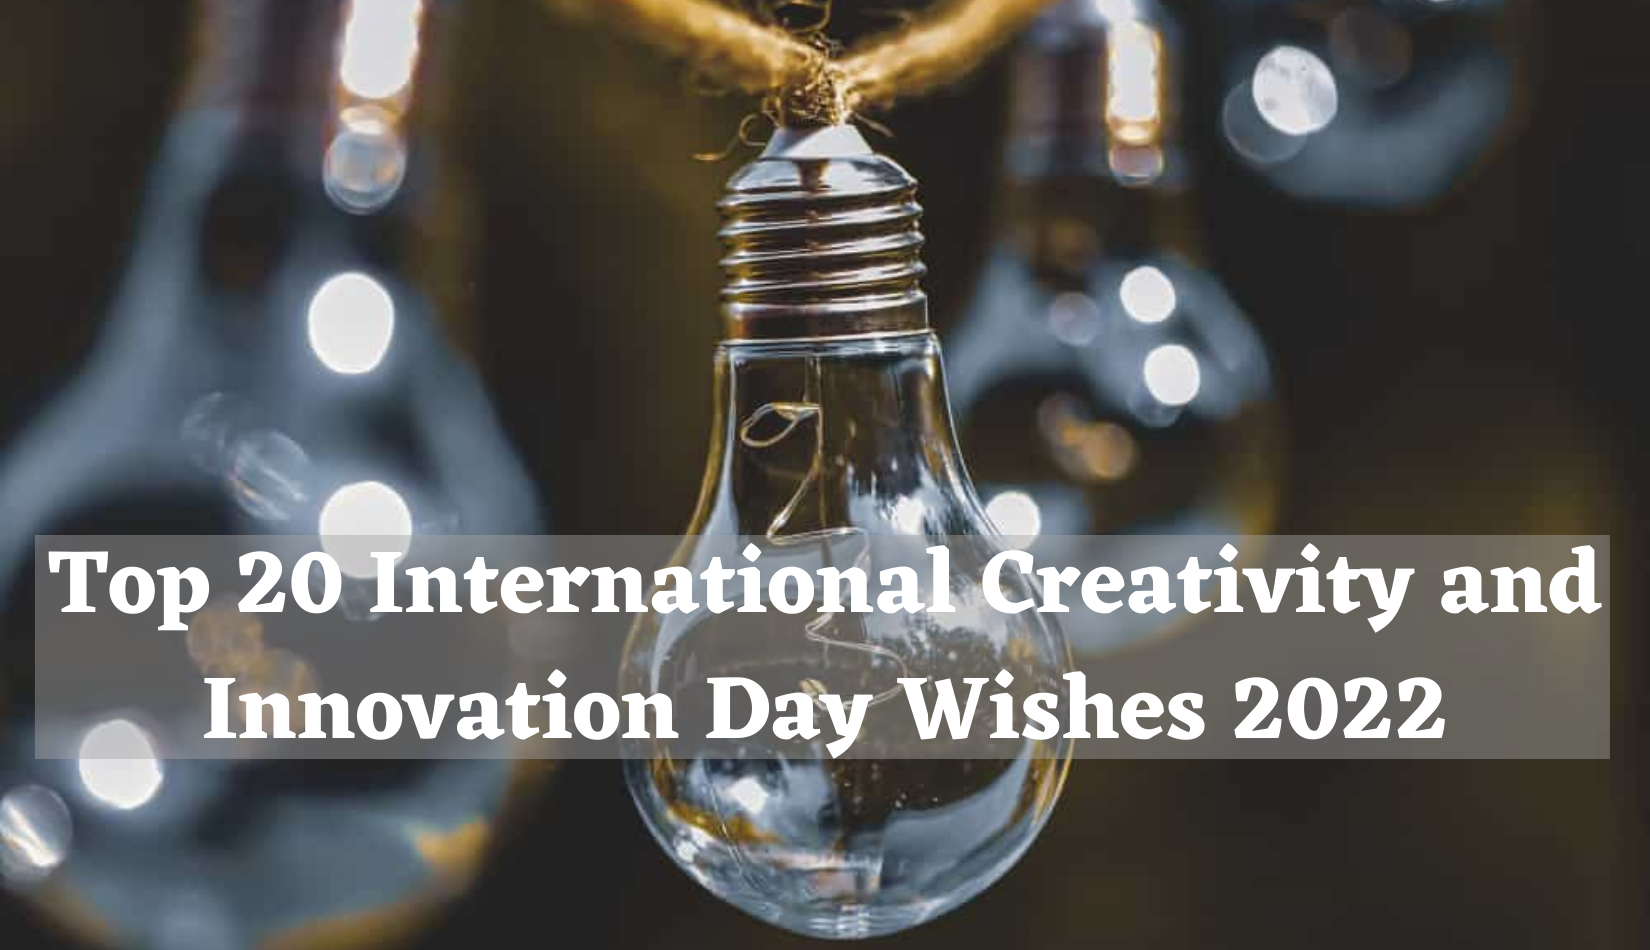 International Creativity and Innovation Day Wishes